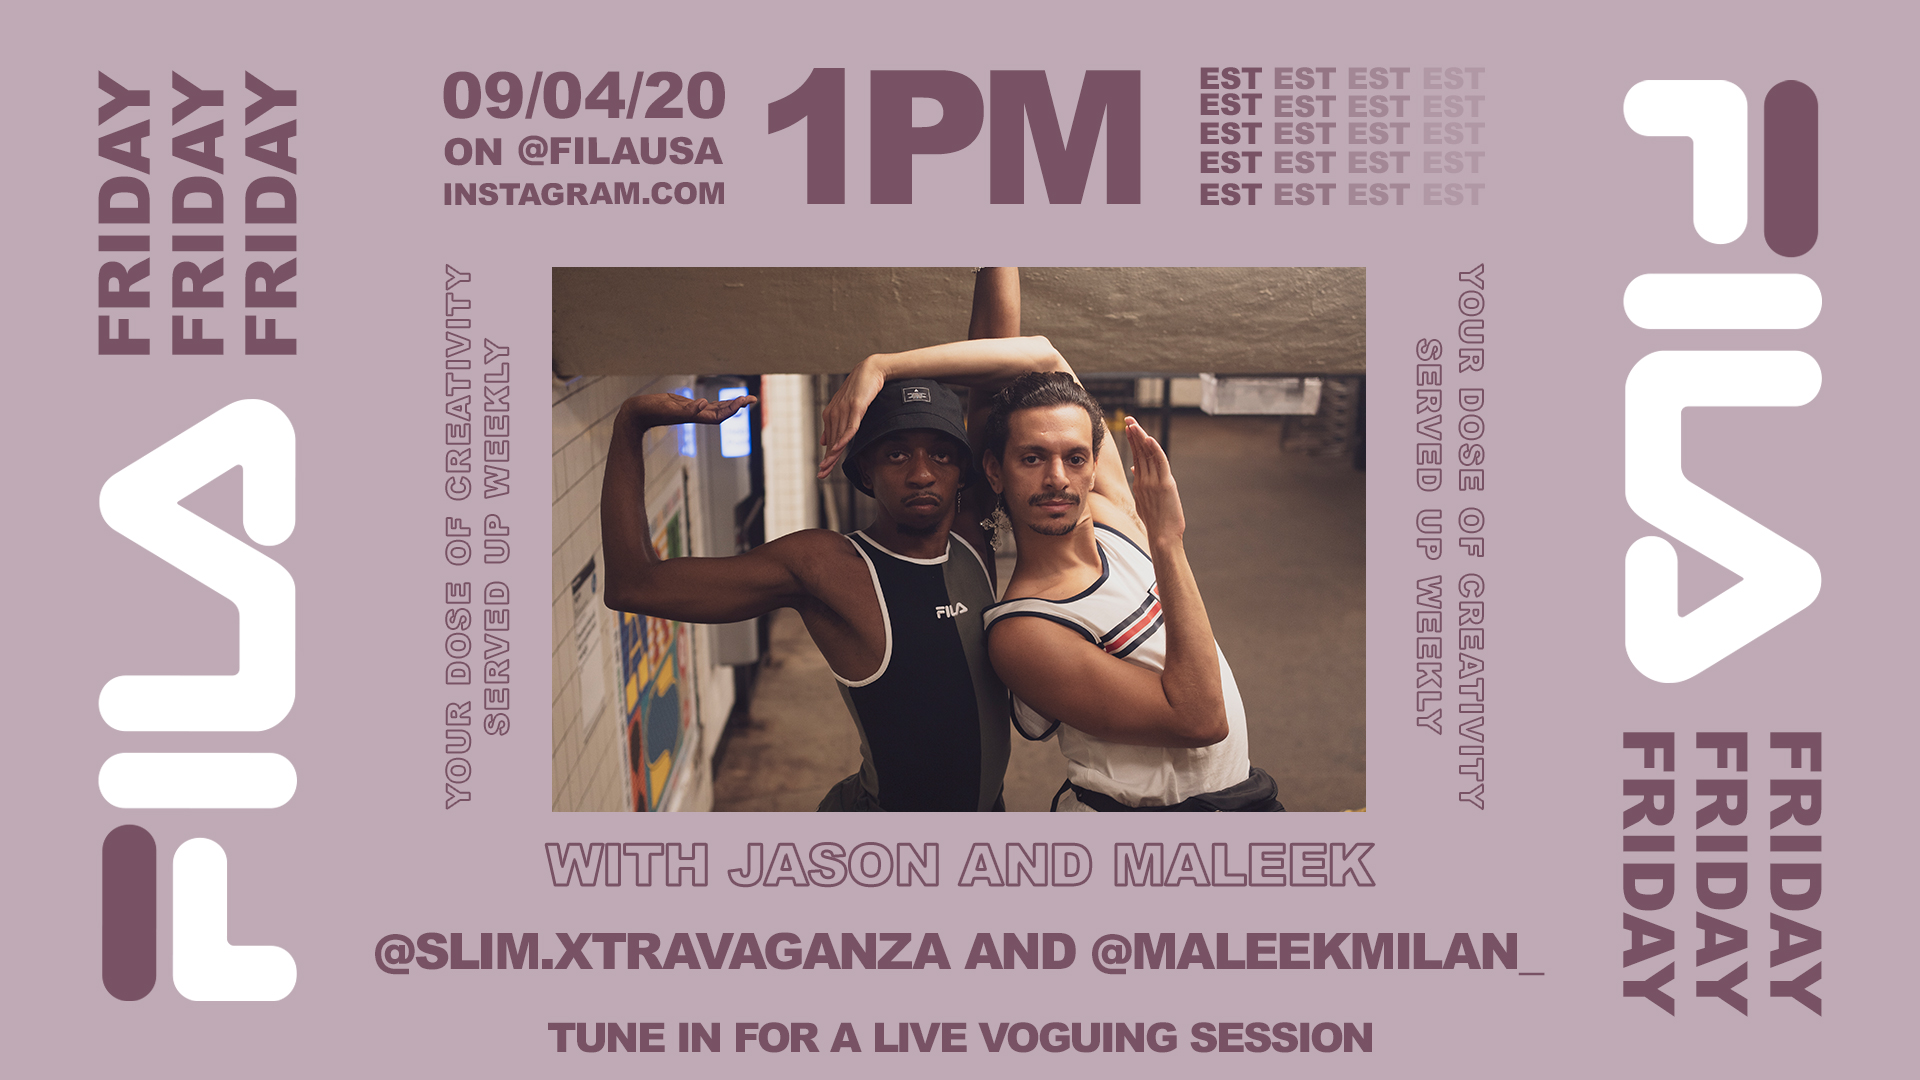 FILA on Twitter: "Get ready to vogue. @slimxtrava and @MaleekMilan are taking over the @filausa Instagram for a voguing session. 📆9/4 at 1PM EST Photos: reyreyfernandez https://t.co/E27Ko4aJZe" / Twitter